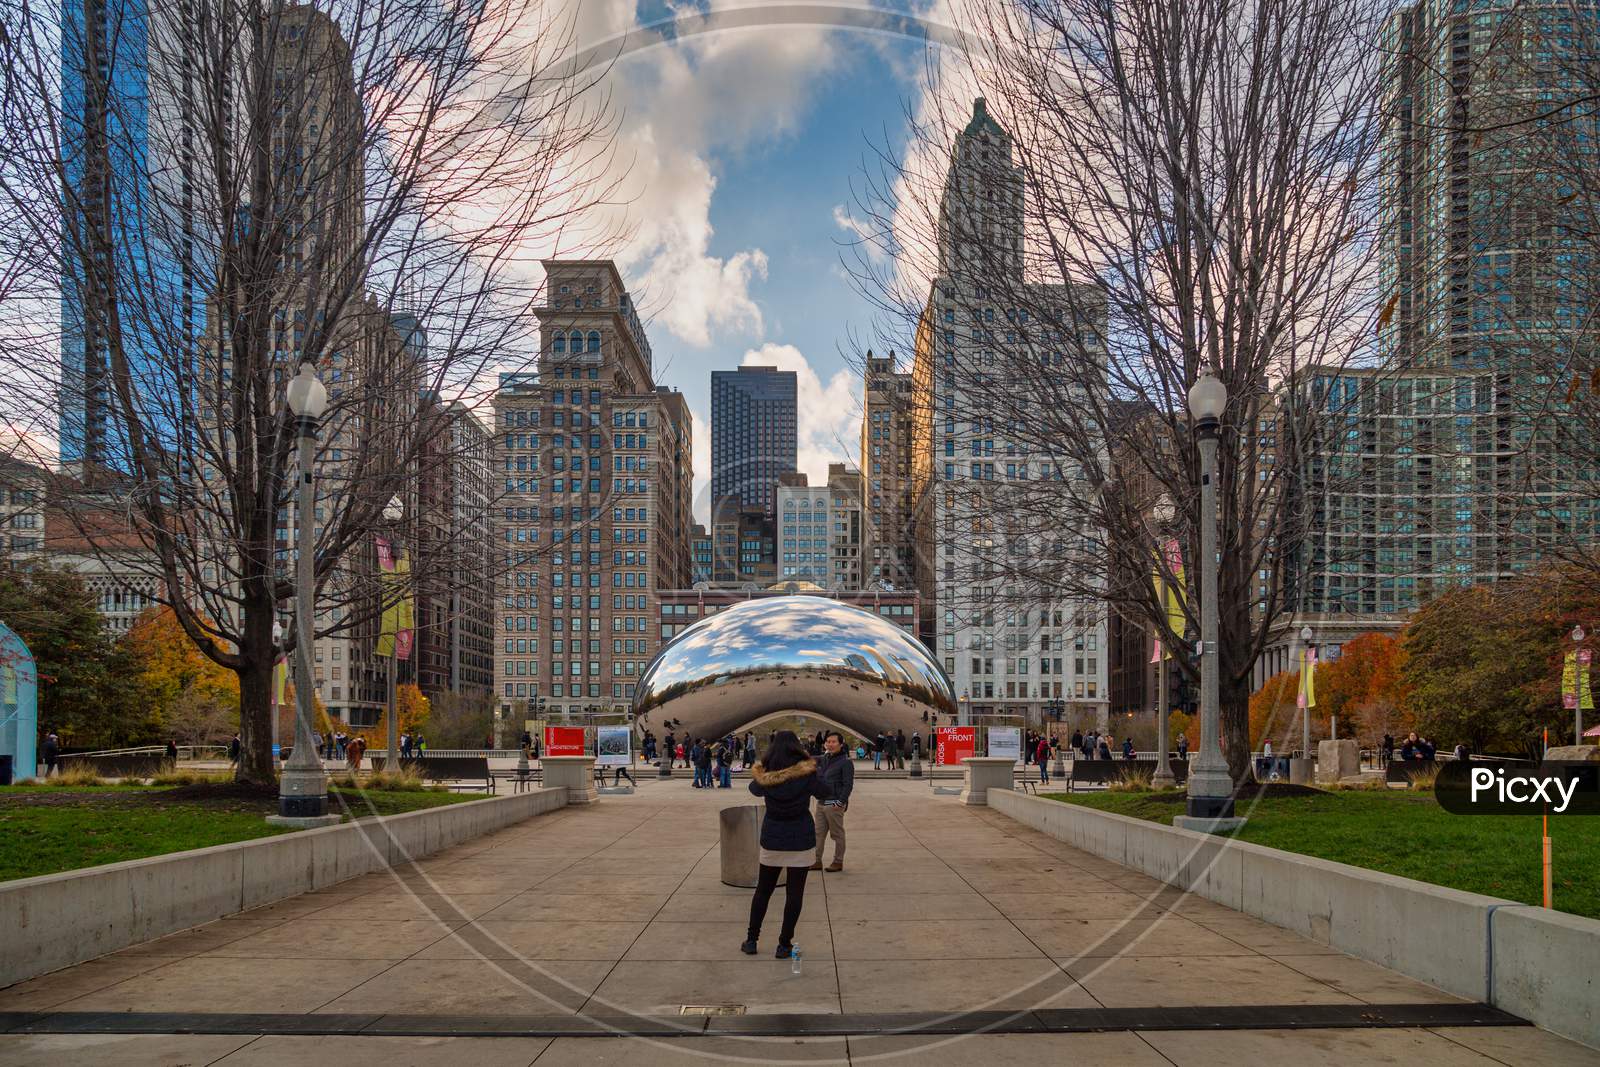 Cloud Gate (The bean) at Millennium Park , Chicago with skyline in the background Daylight view.